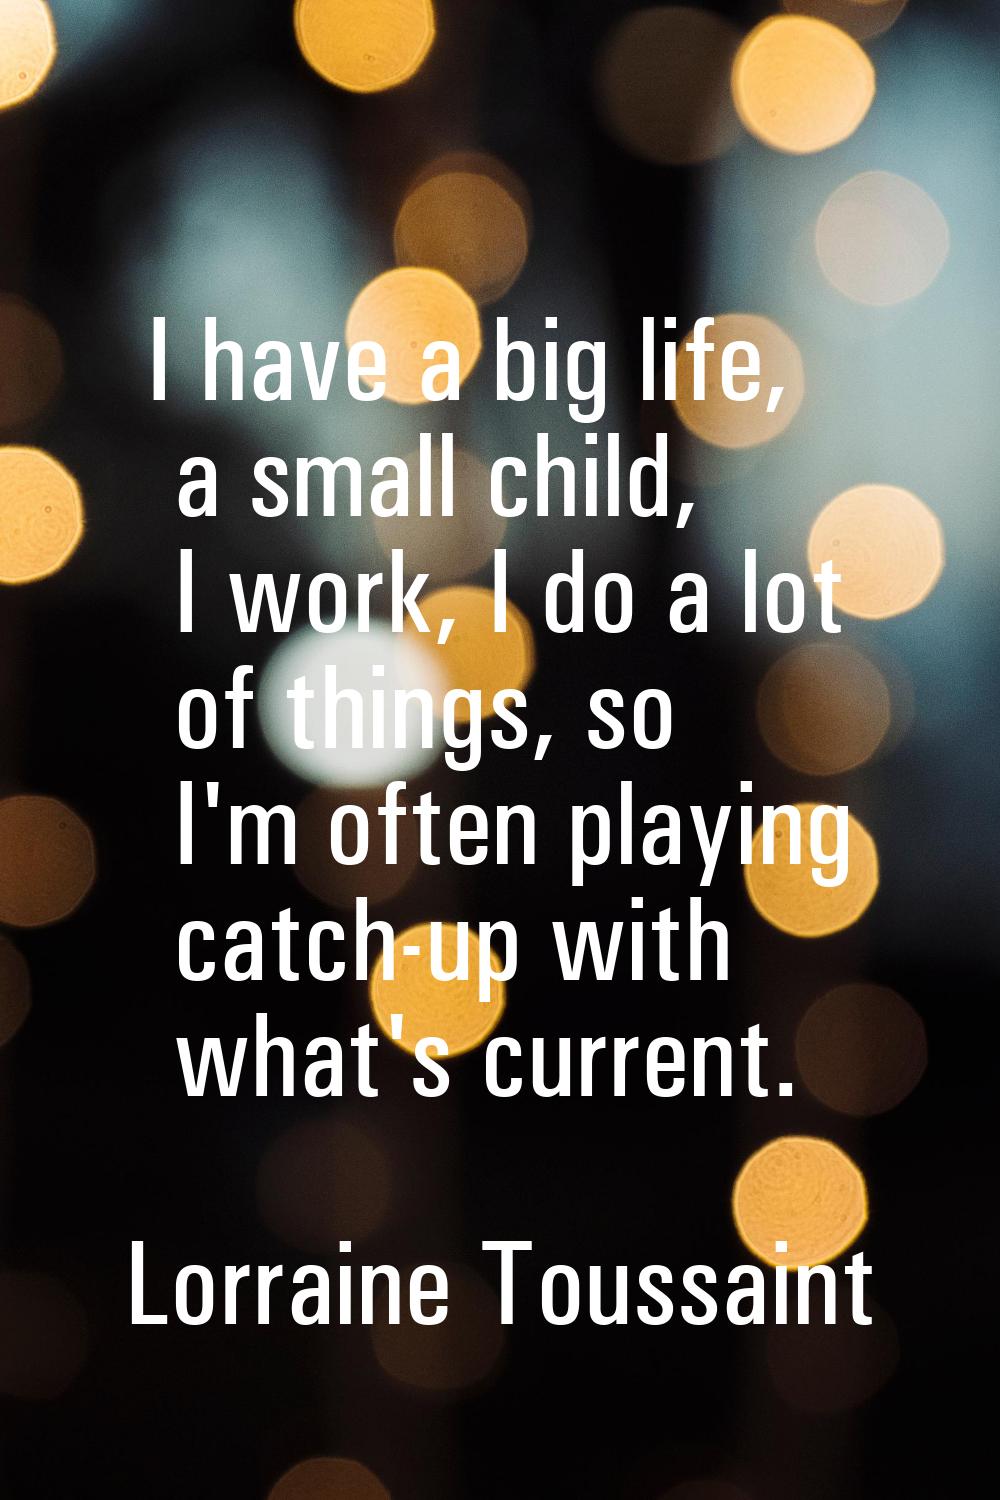 I have a big life, a small child, I work, I do a lot of things, so I'm often playing catch-up with 